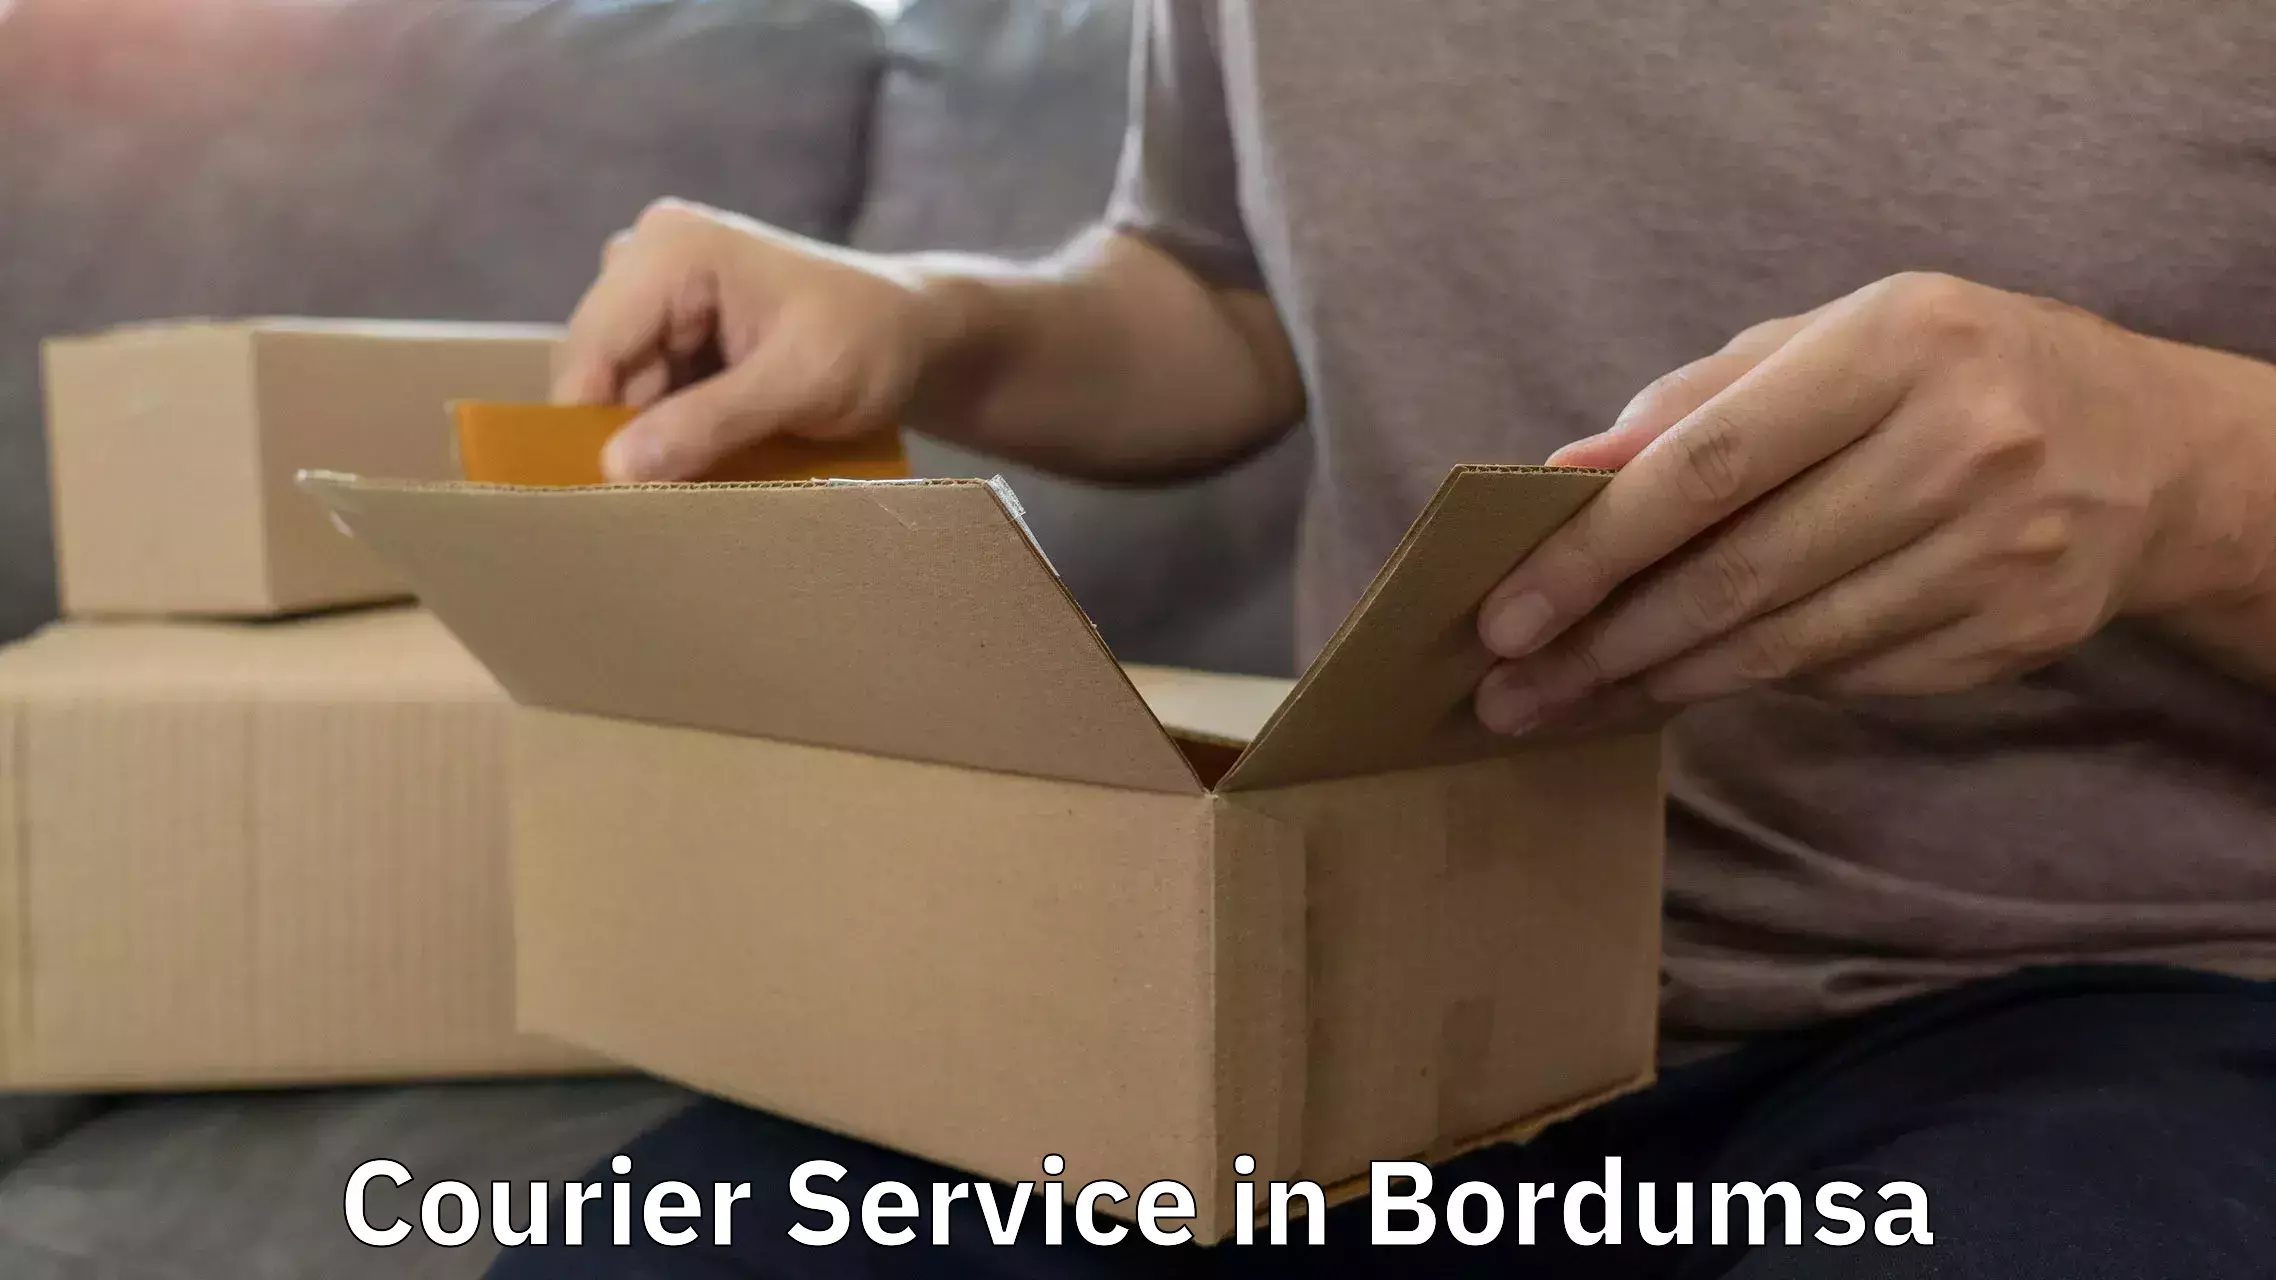 Affordable shipping solutions in Bordumsa